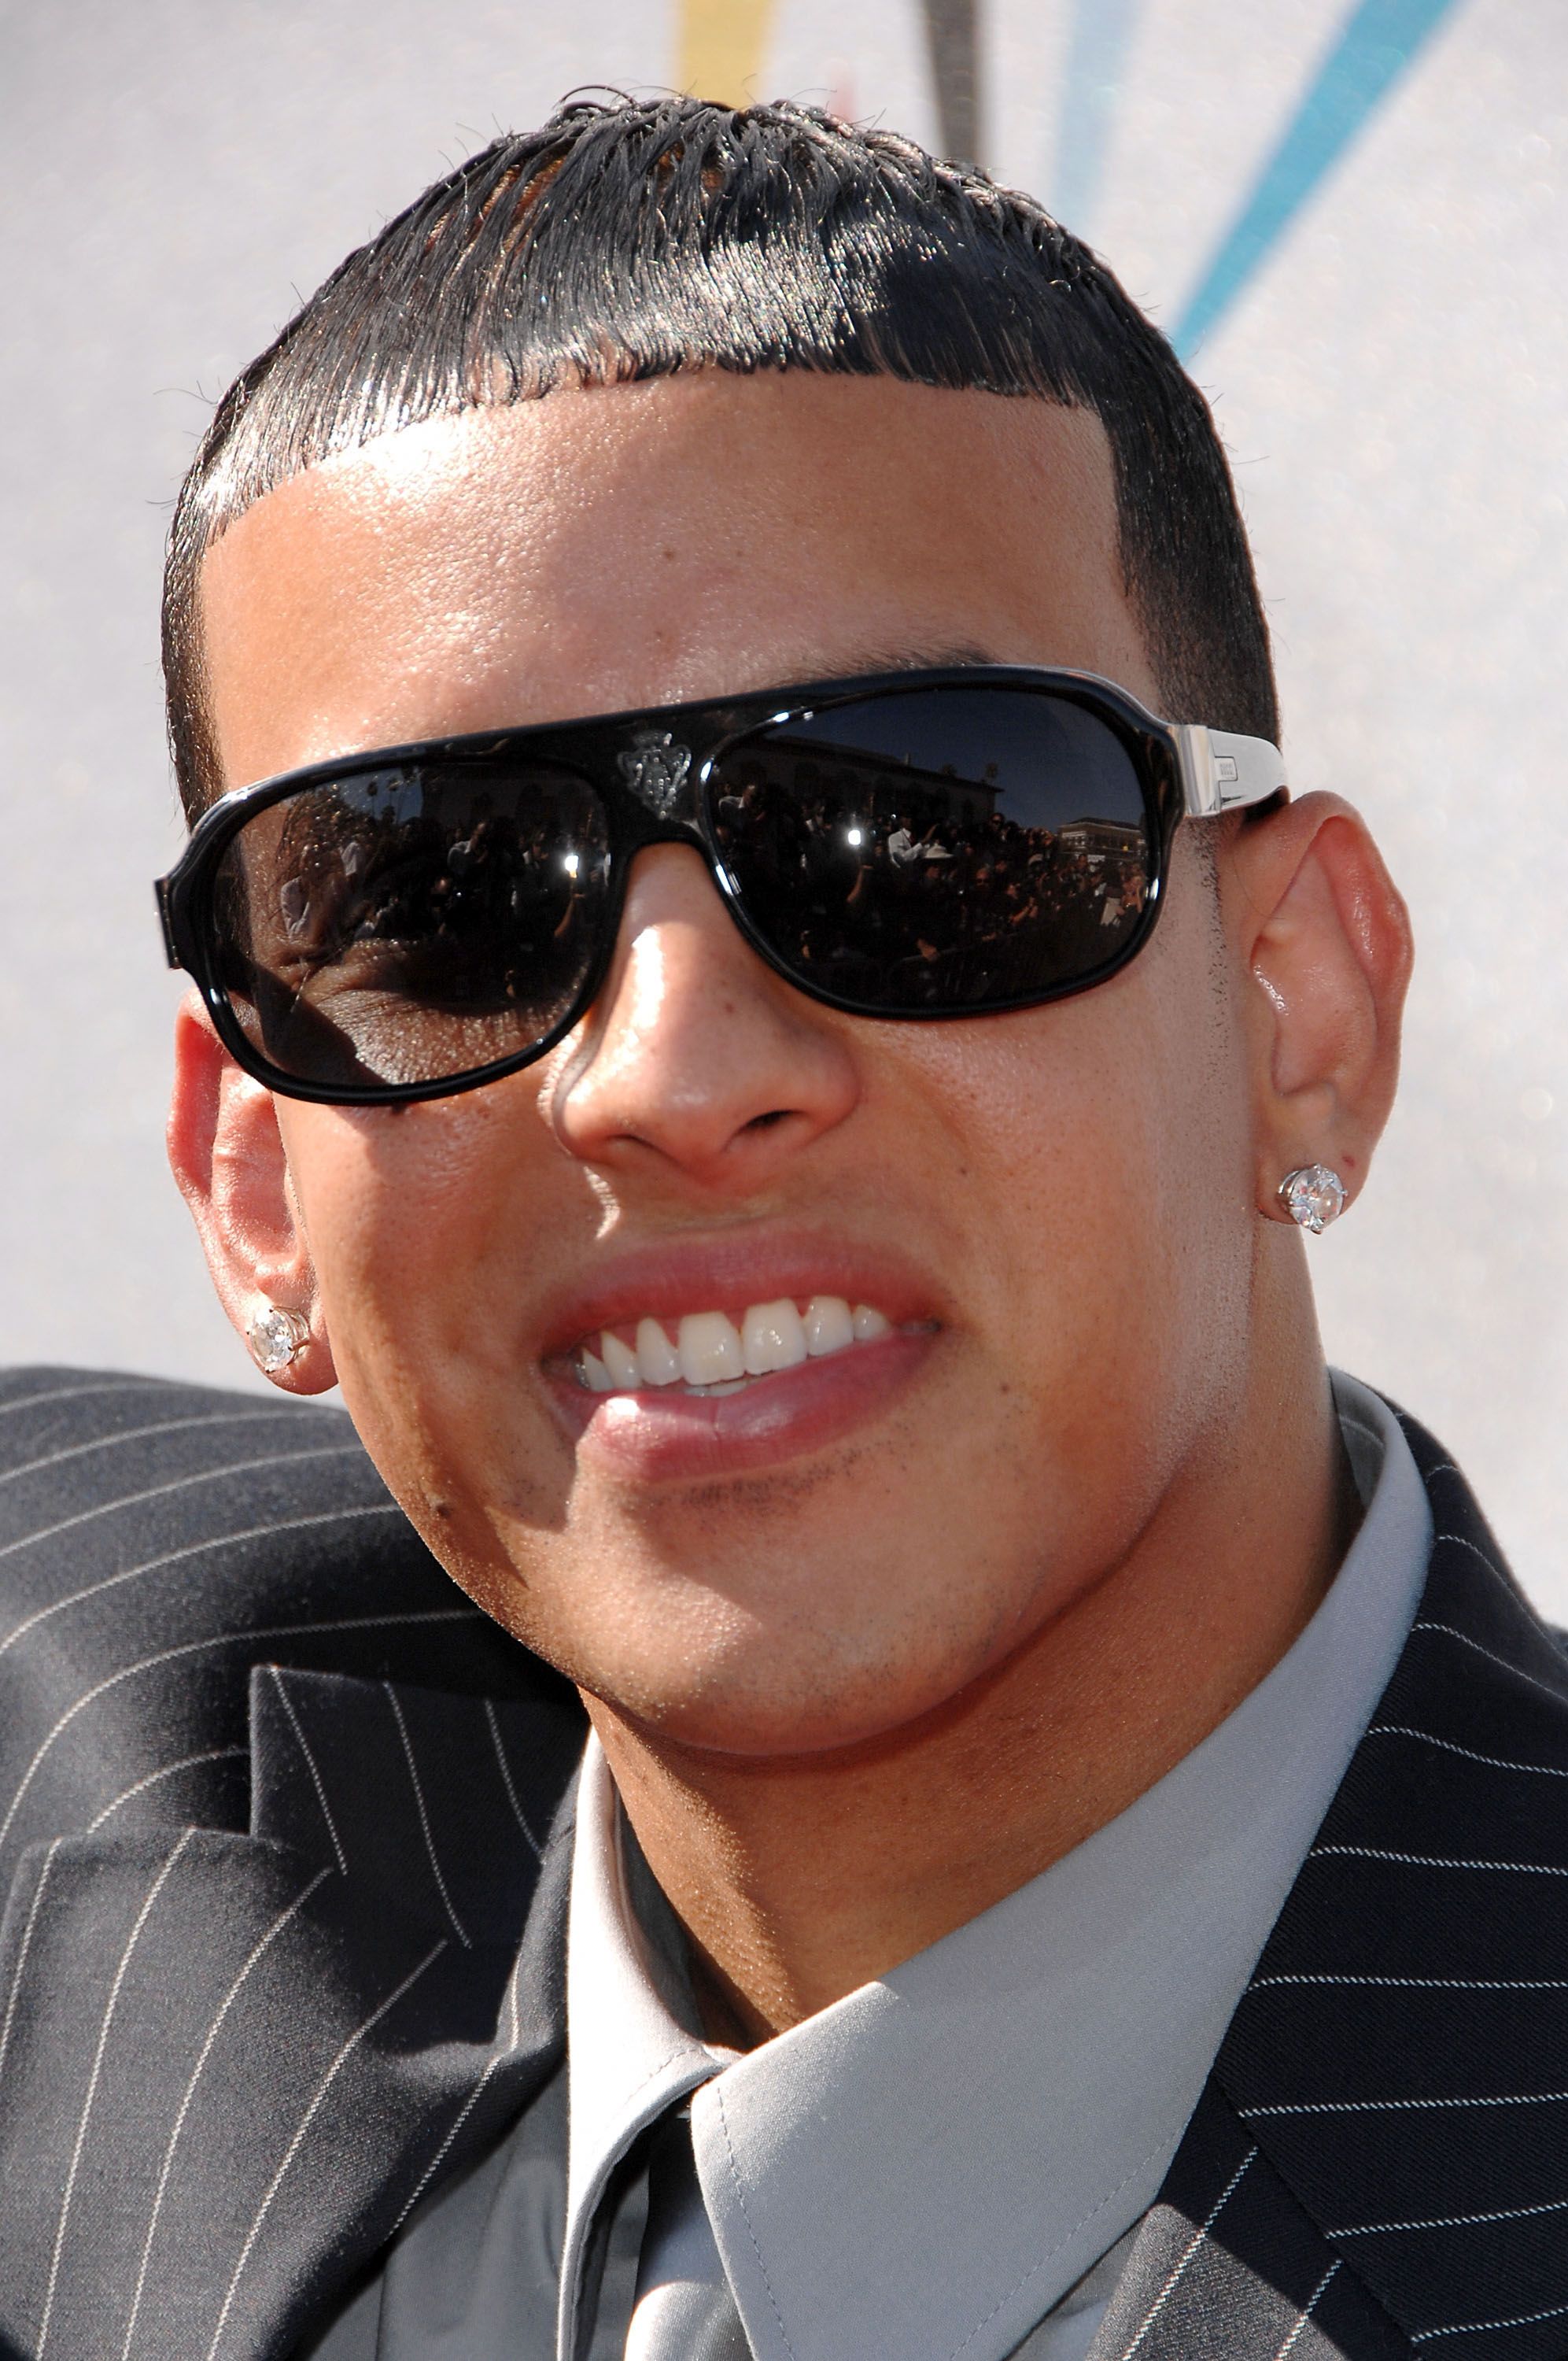 daddy yankee new song